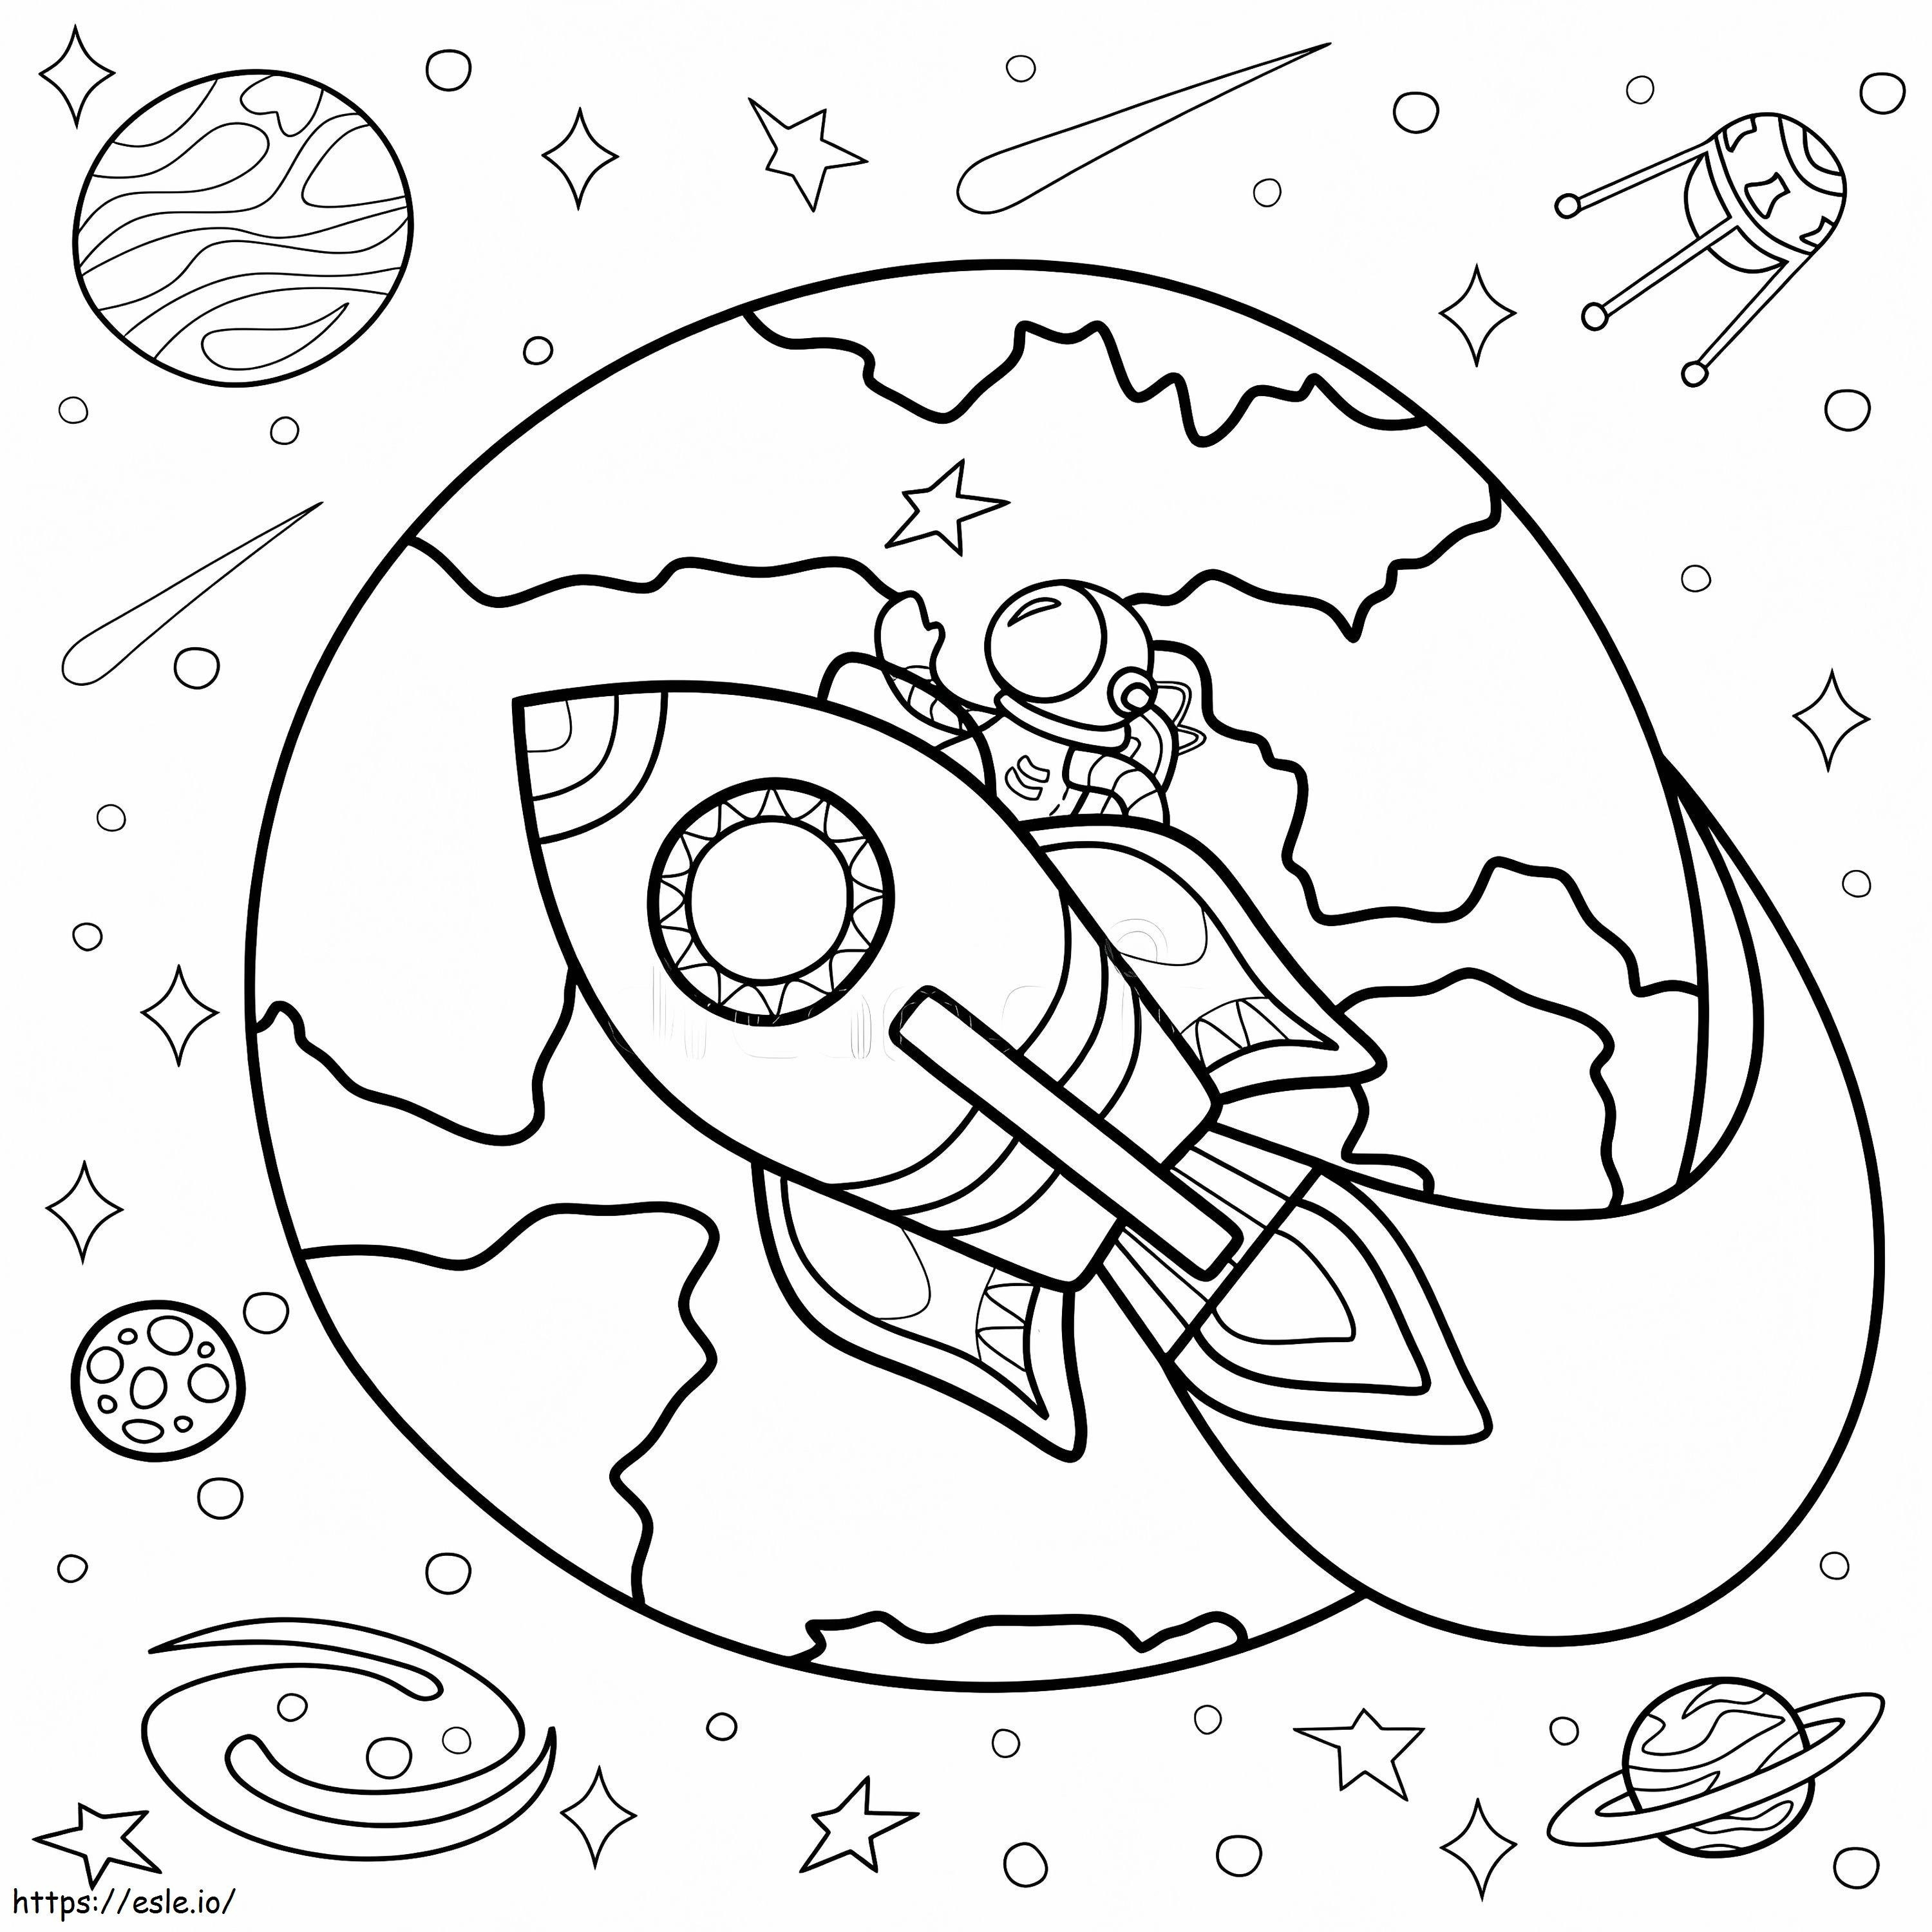 Astronaut On Rocket In Space coloring page